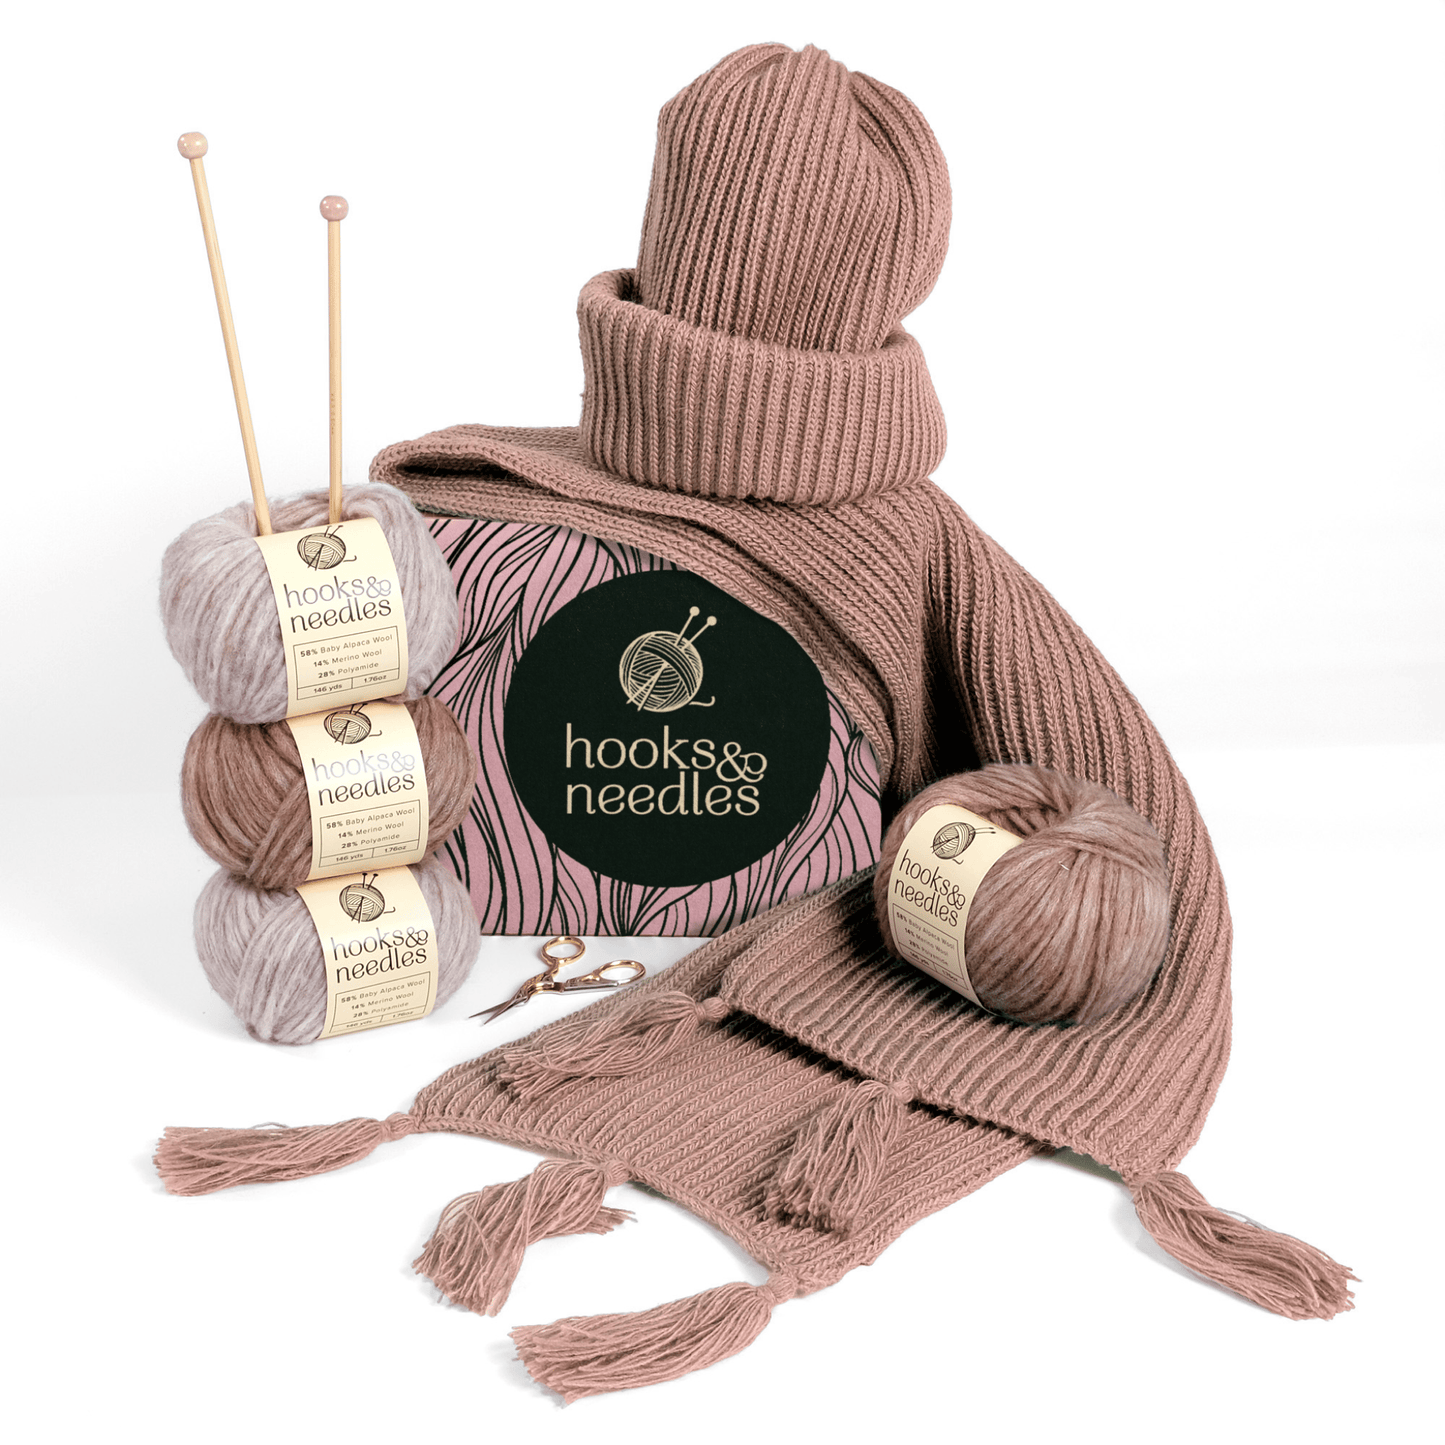 Knitting accessories including yarn balls, needles, and a finished scarf with a sweater, all in matching dusty pink, displayed on a white background. [6-Month-Prepaid] Hooks & Needles Subscription Box #20